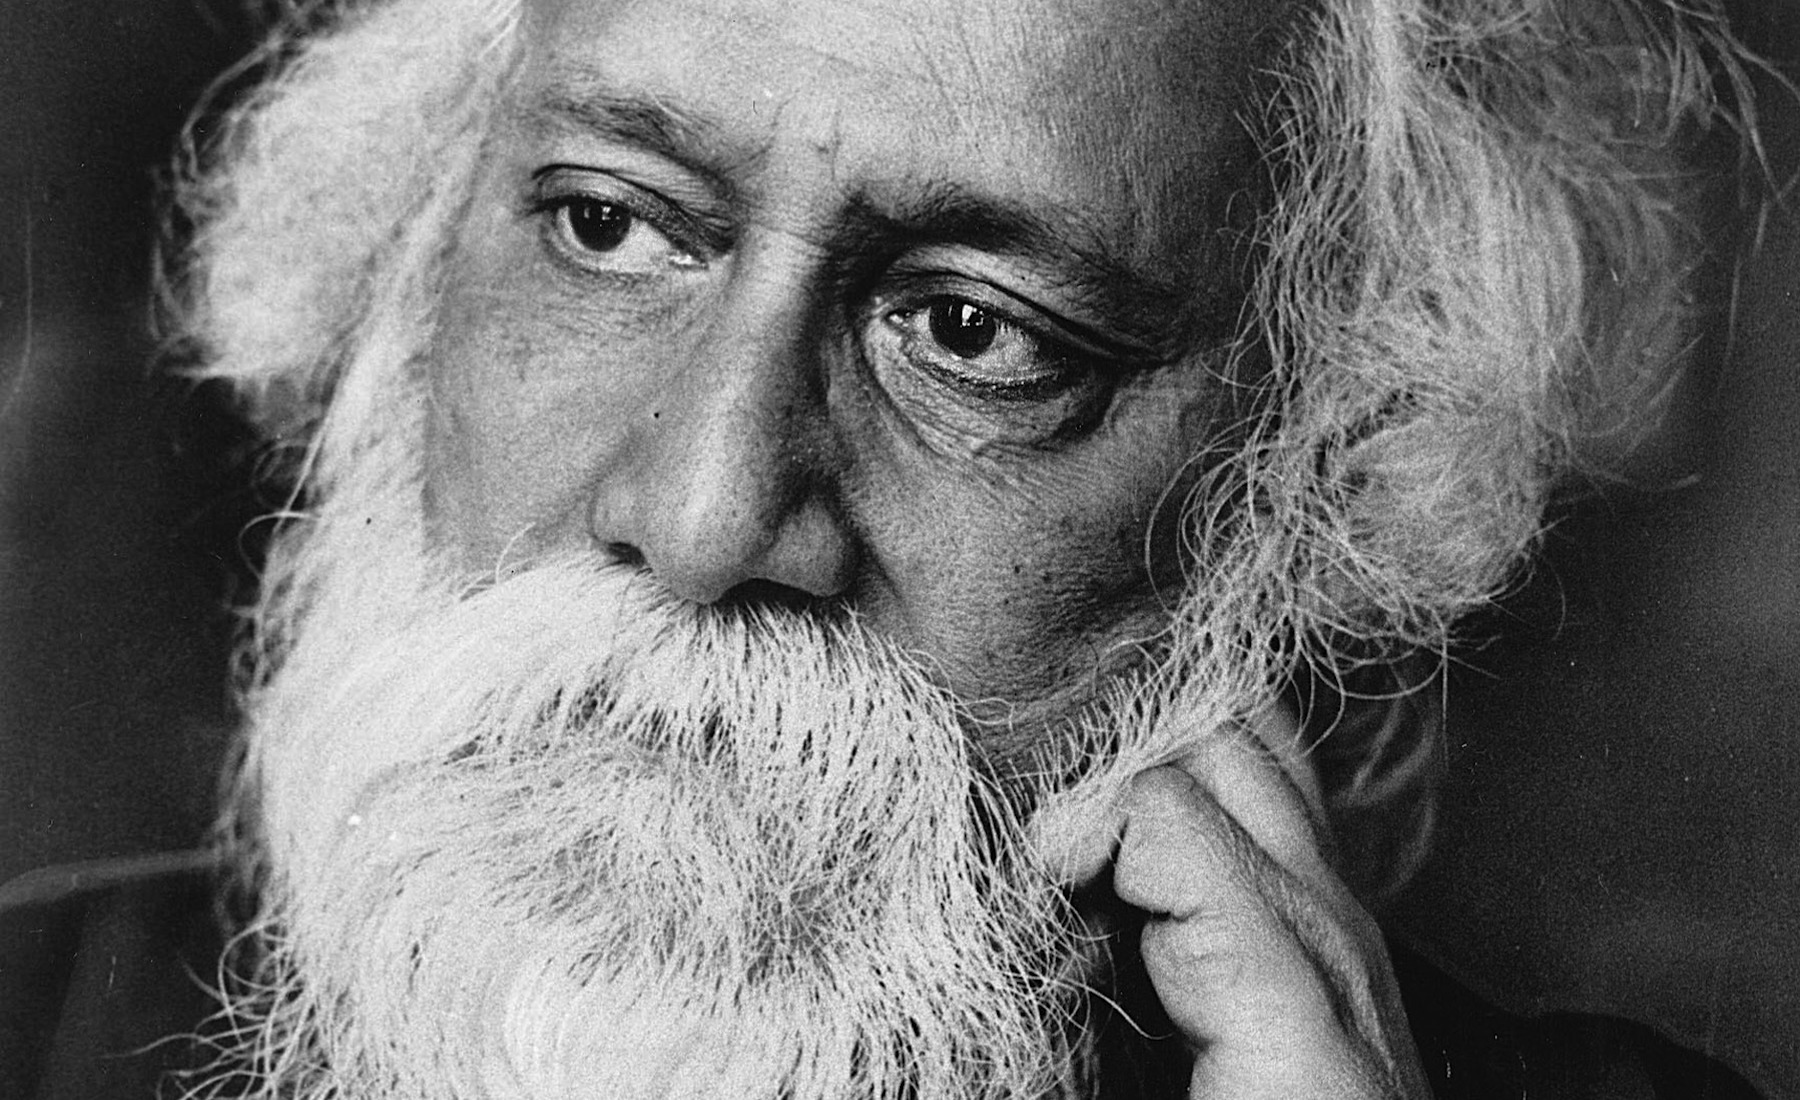 This is an undated photo of Sir Rabindranath Tagore, Hindu poet, writer and philosopher, in Calcutta, India. Tagore was born in Calcutta in 1861 and was the first Asian to receive the Nobel Prize in literature in 1913. He was knighted in 1915, but denounced the honor in 1919 to protest against British policy in Punjab. He died on Aug. 7, 1941. (AP Photo) ORG XMIT: APHS103